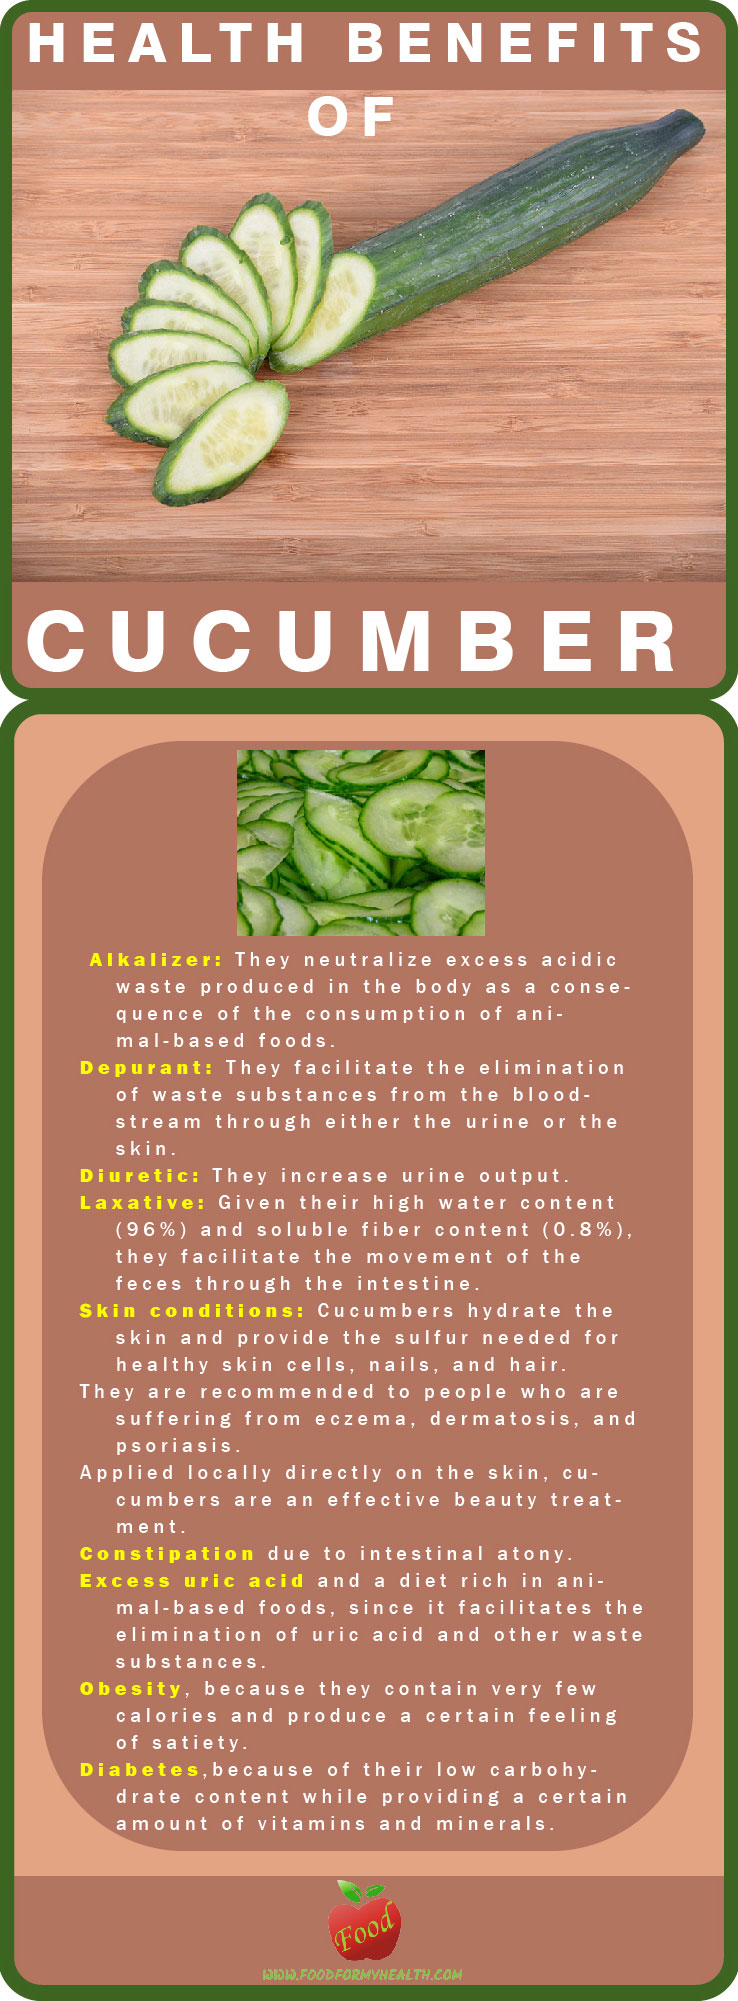 Cucumber nutrition facts and health benefits